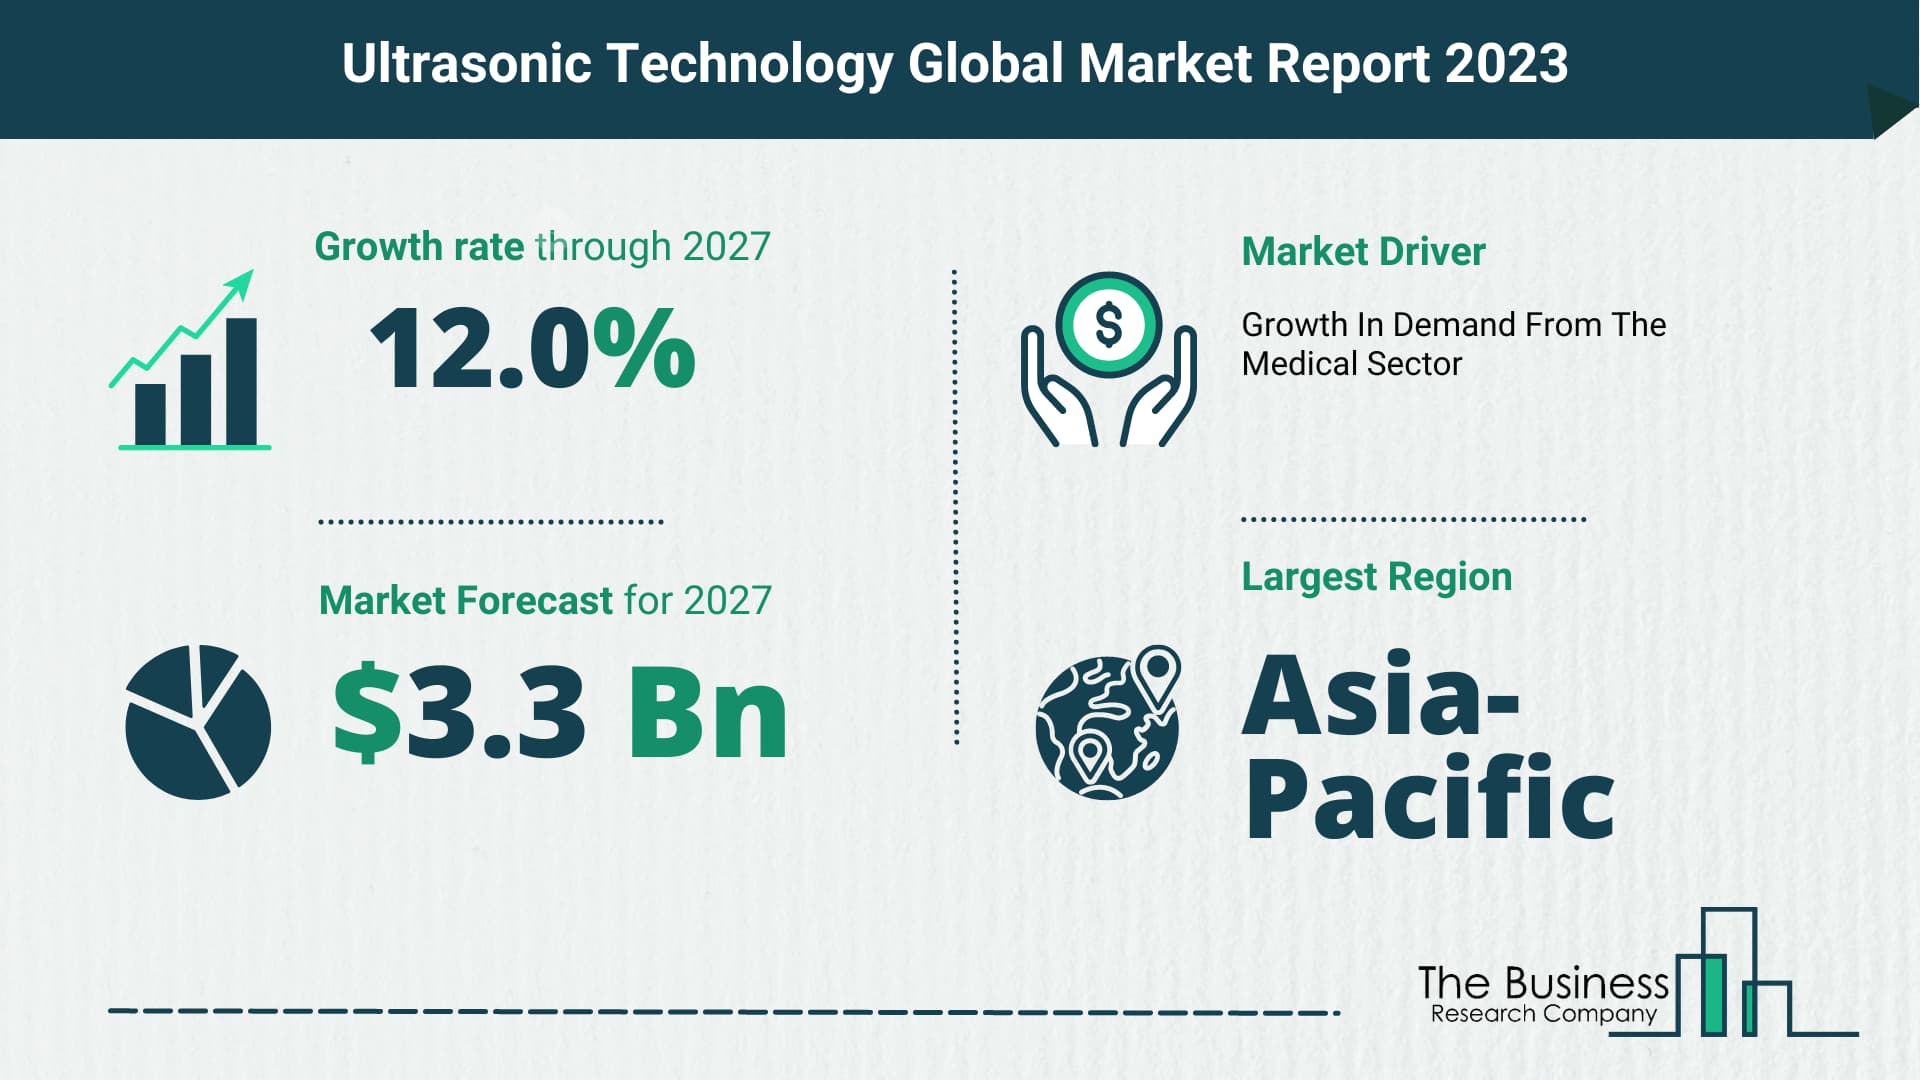 How Will The Ultrasonic Technology Market Globally Expand In 2023?